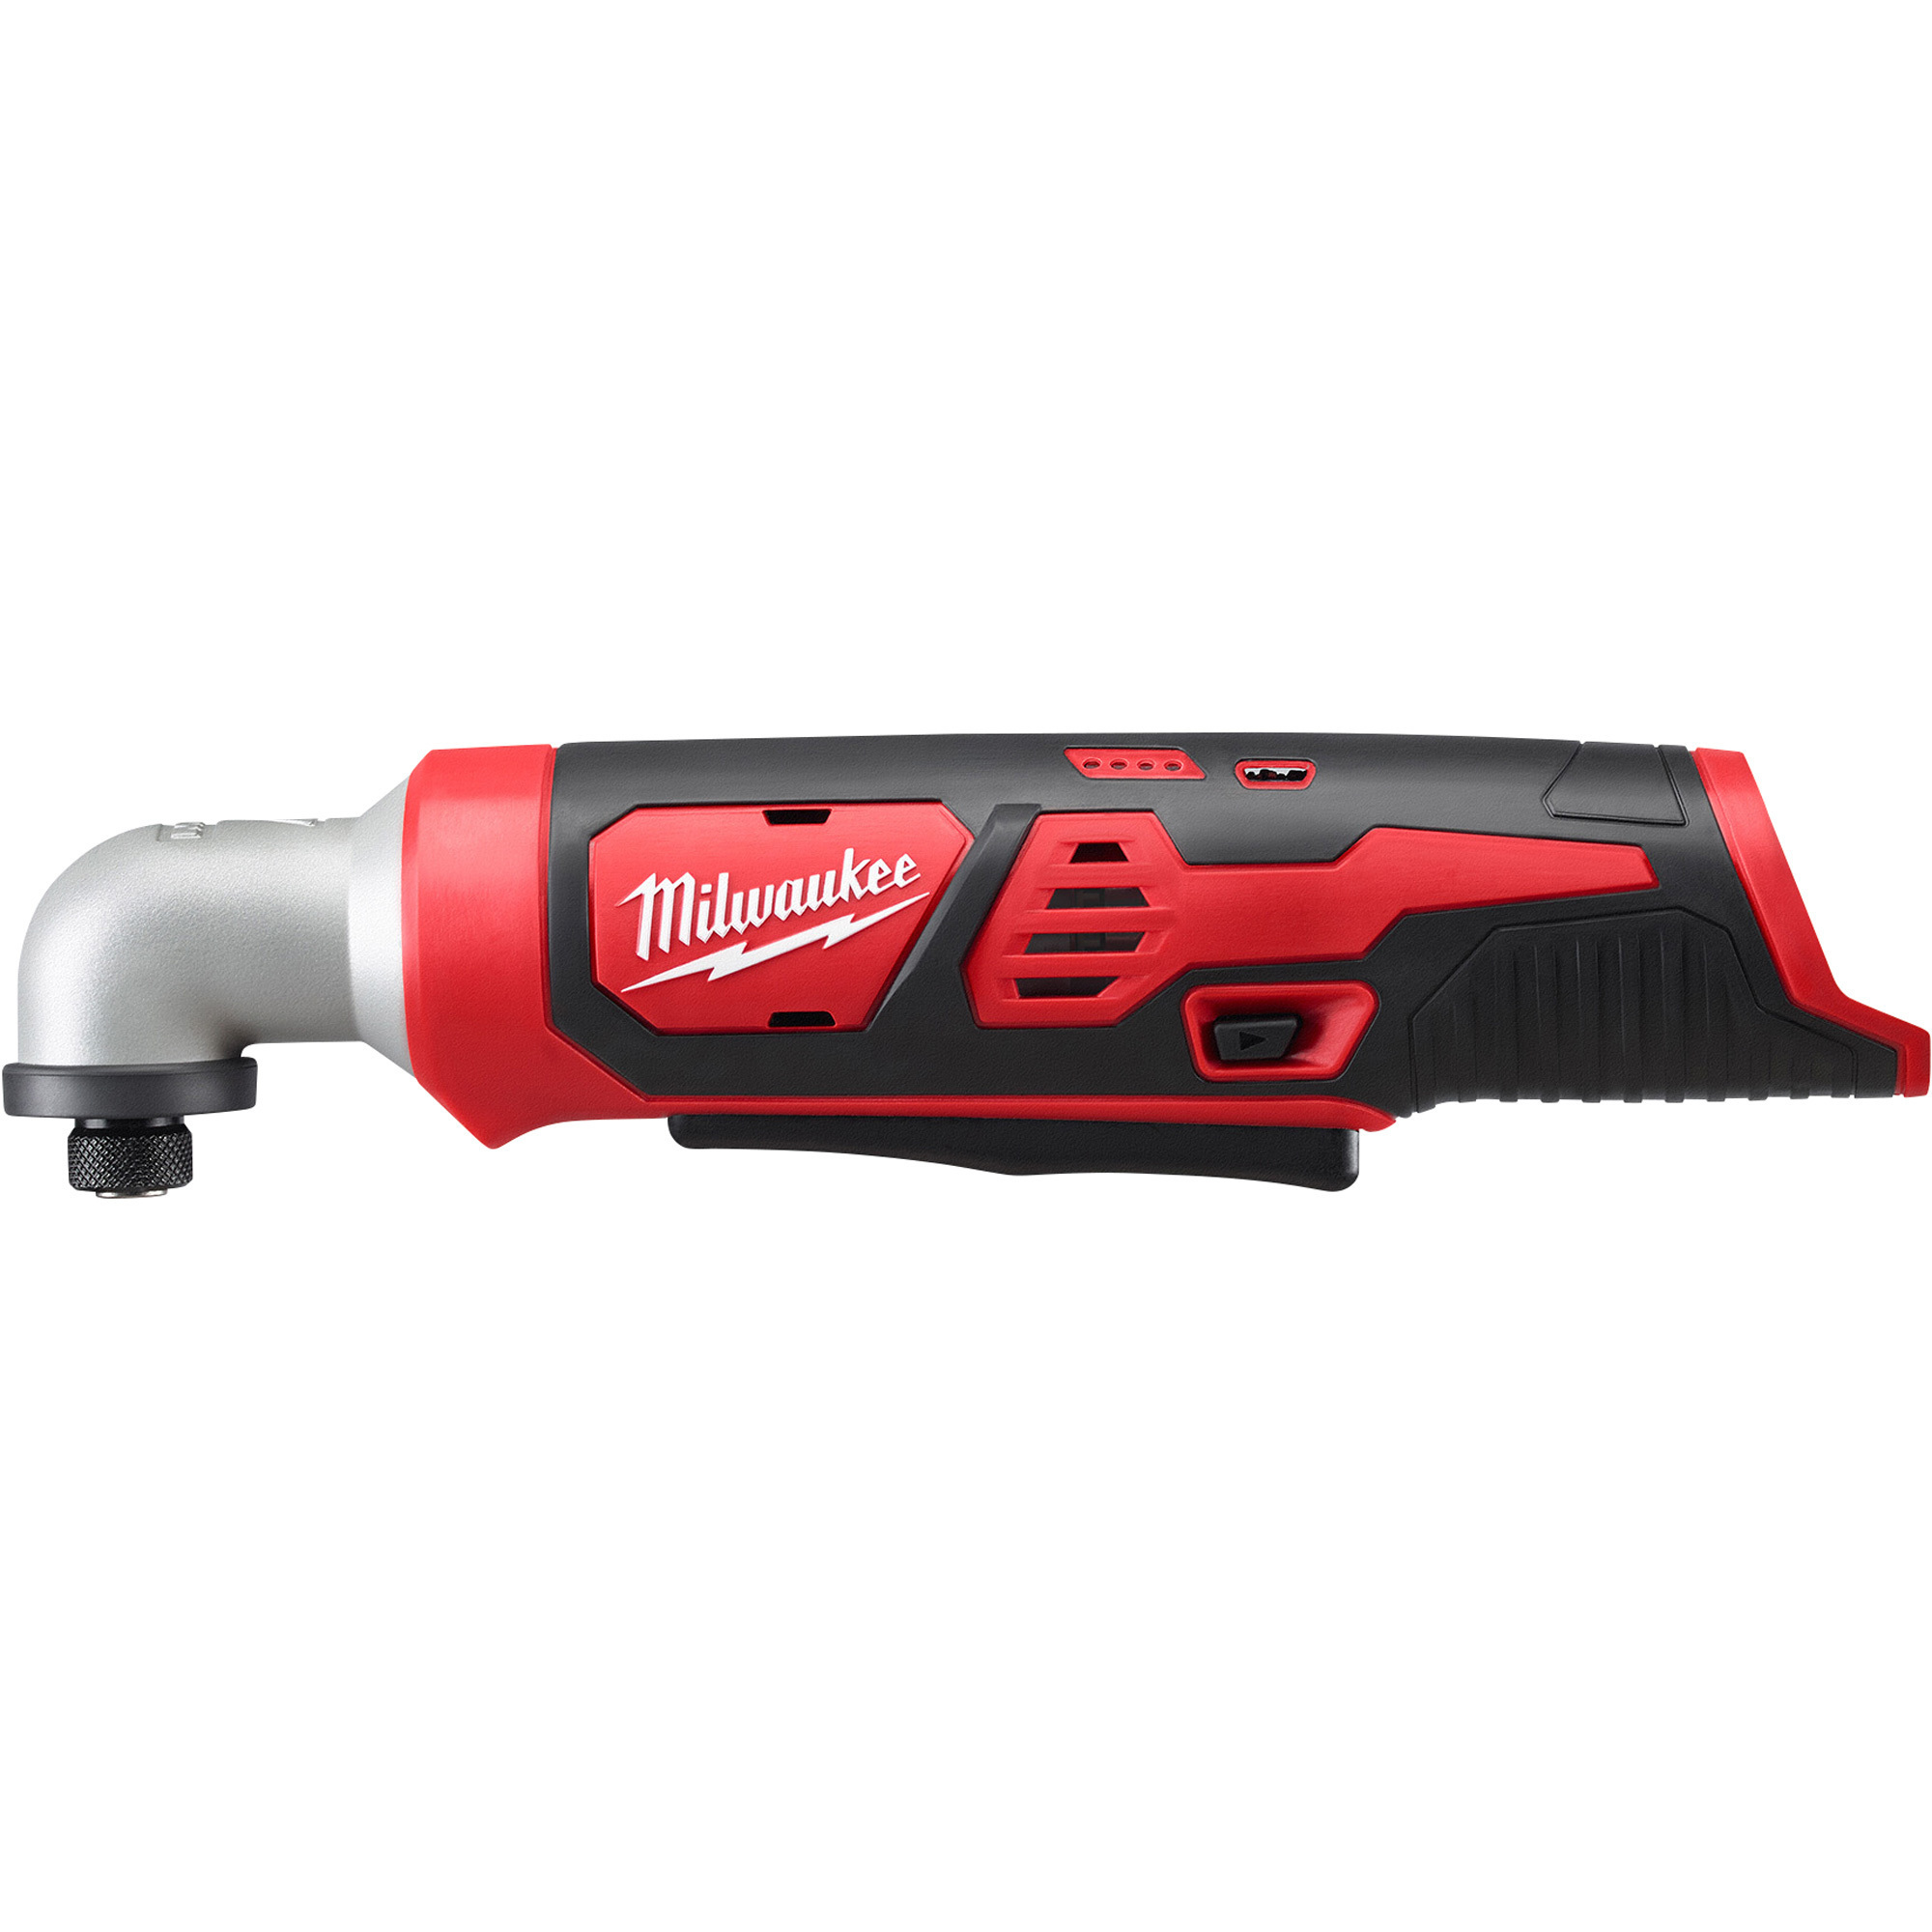 Milwaukee M12 1/4Inch Hex Right Angle Impact Driver, Tool Only, Model 2467-20